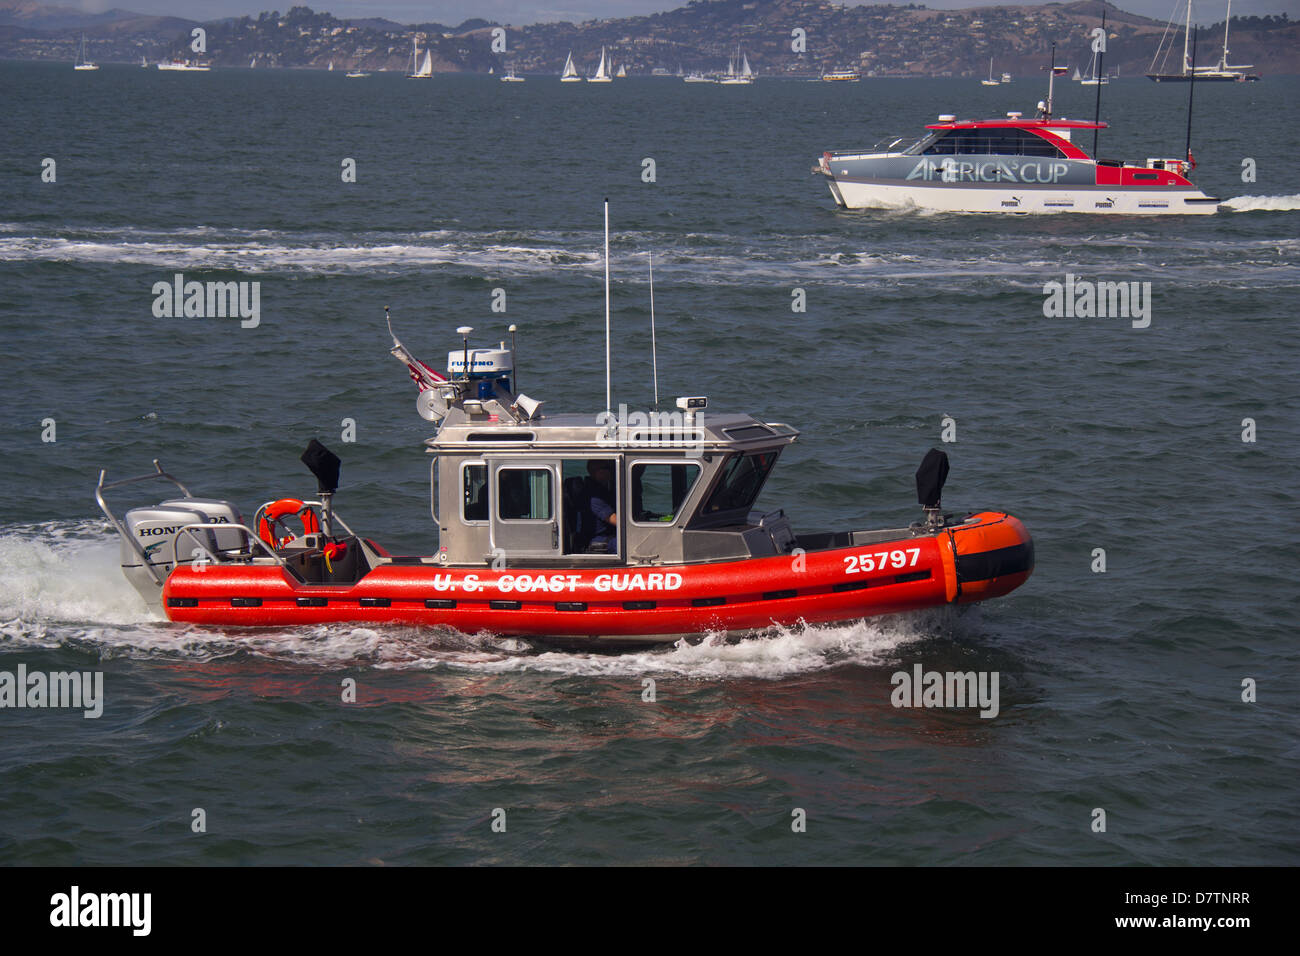 US coast guard rescue boat patroling on San Francisco Bay during the America's Cup sailing race California North USA Stock Photo